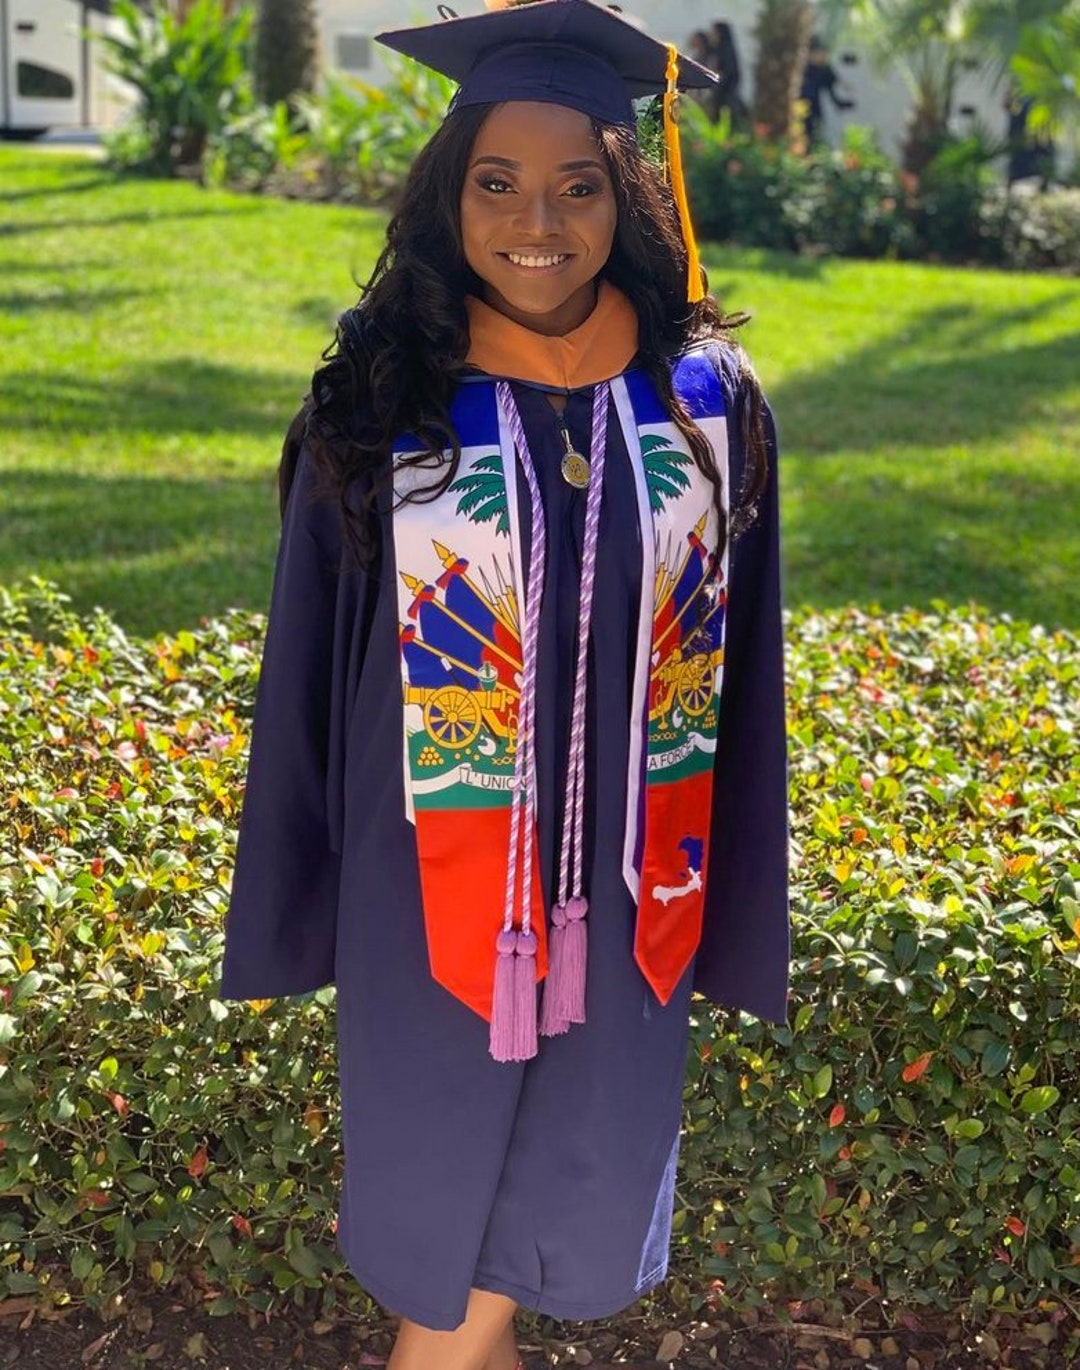 Class of 2022: Organizational stoles and academic cords